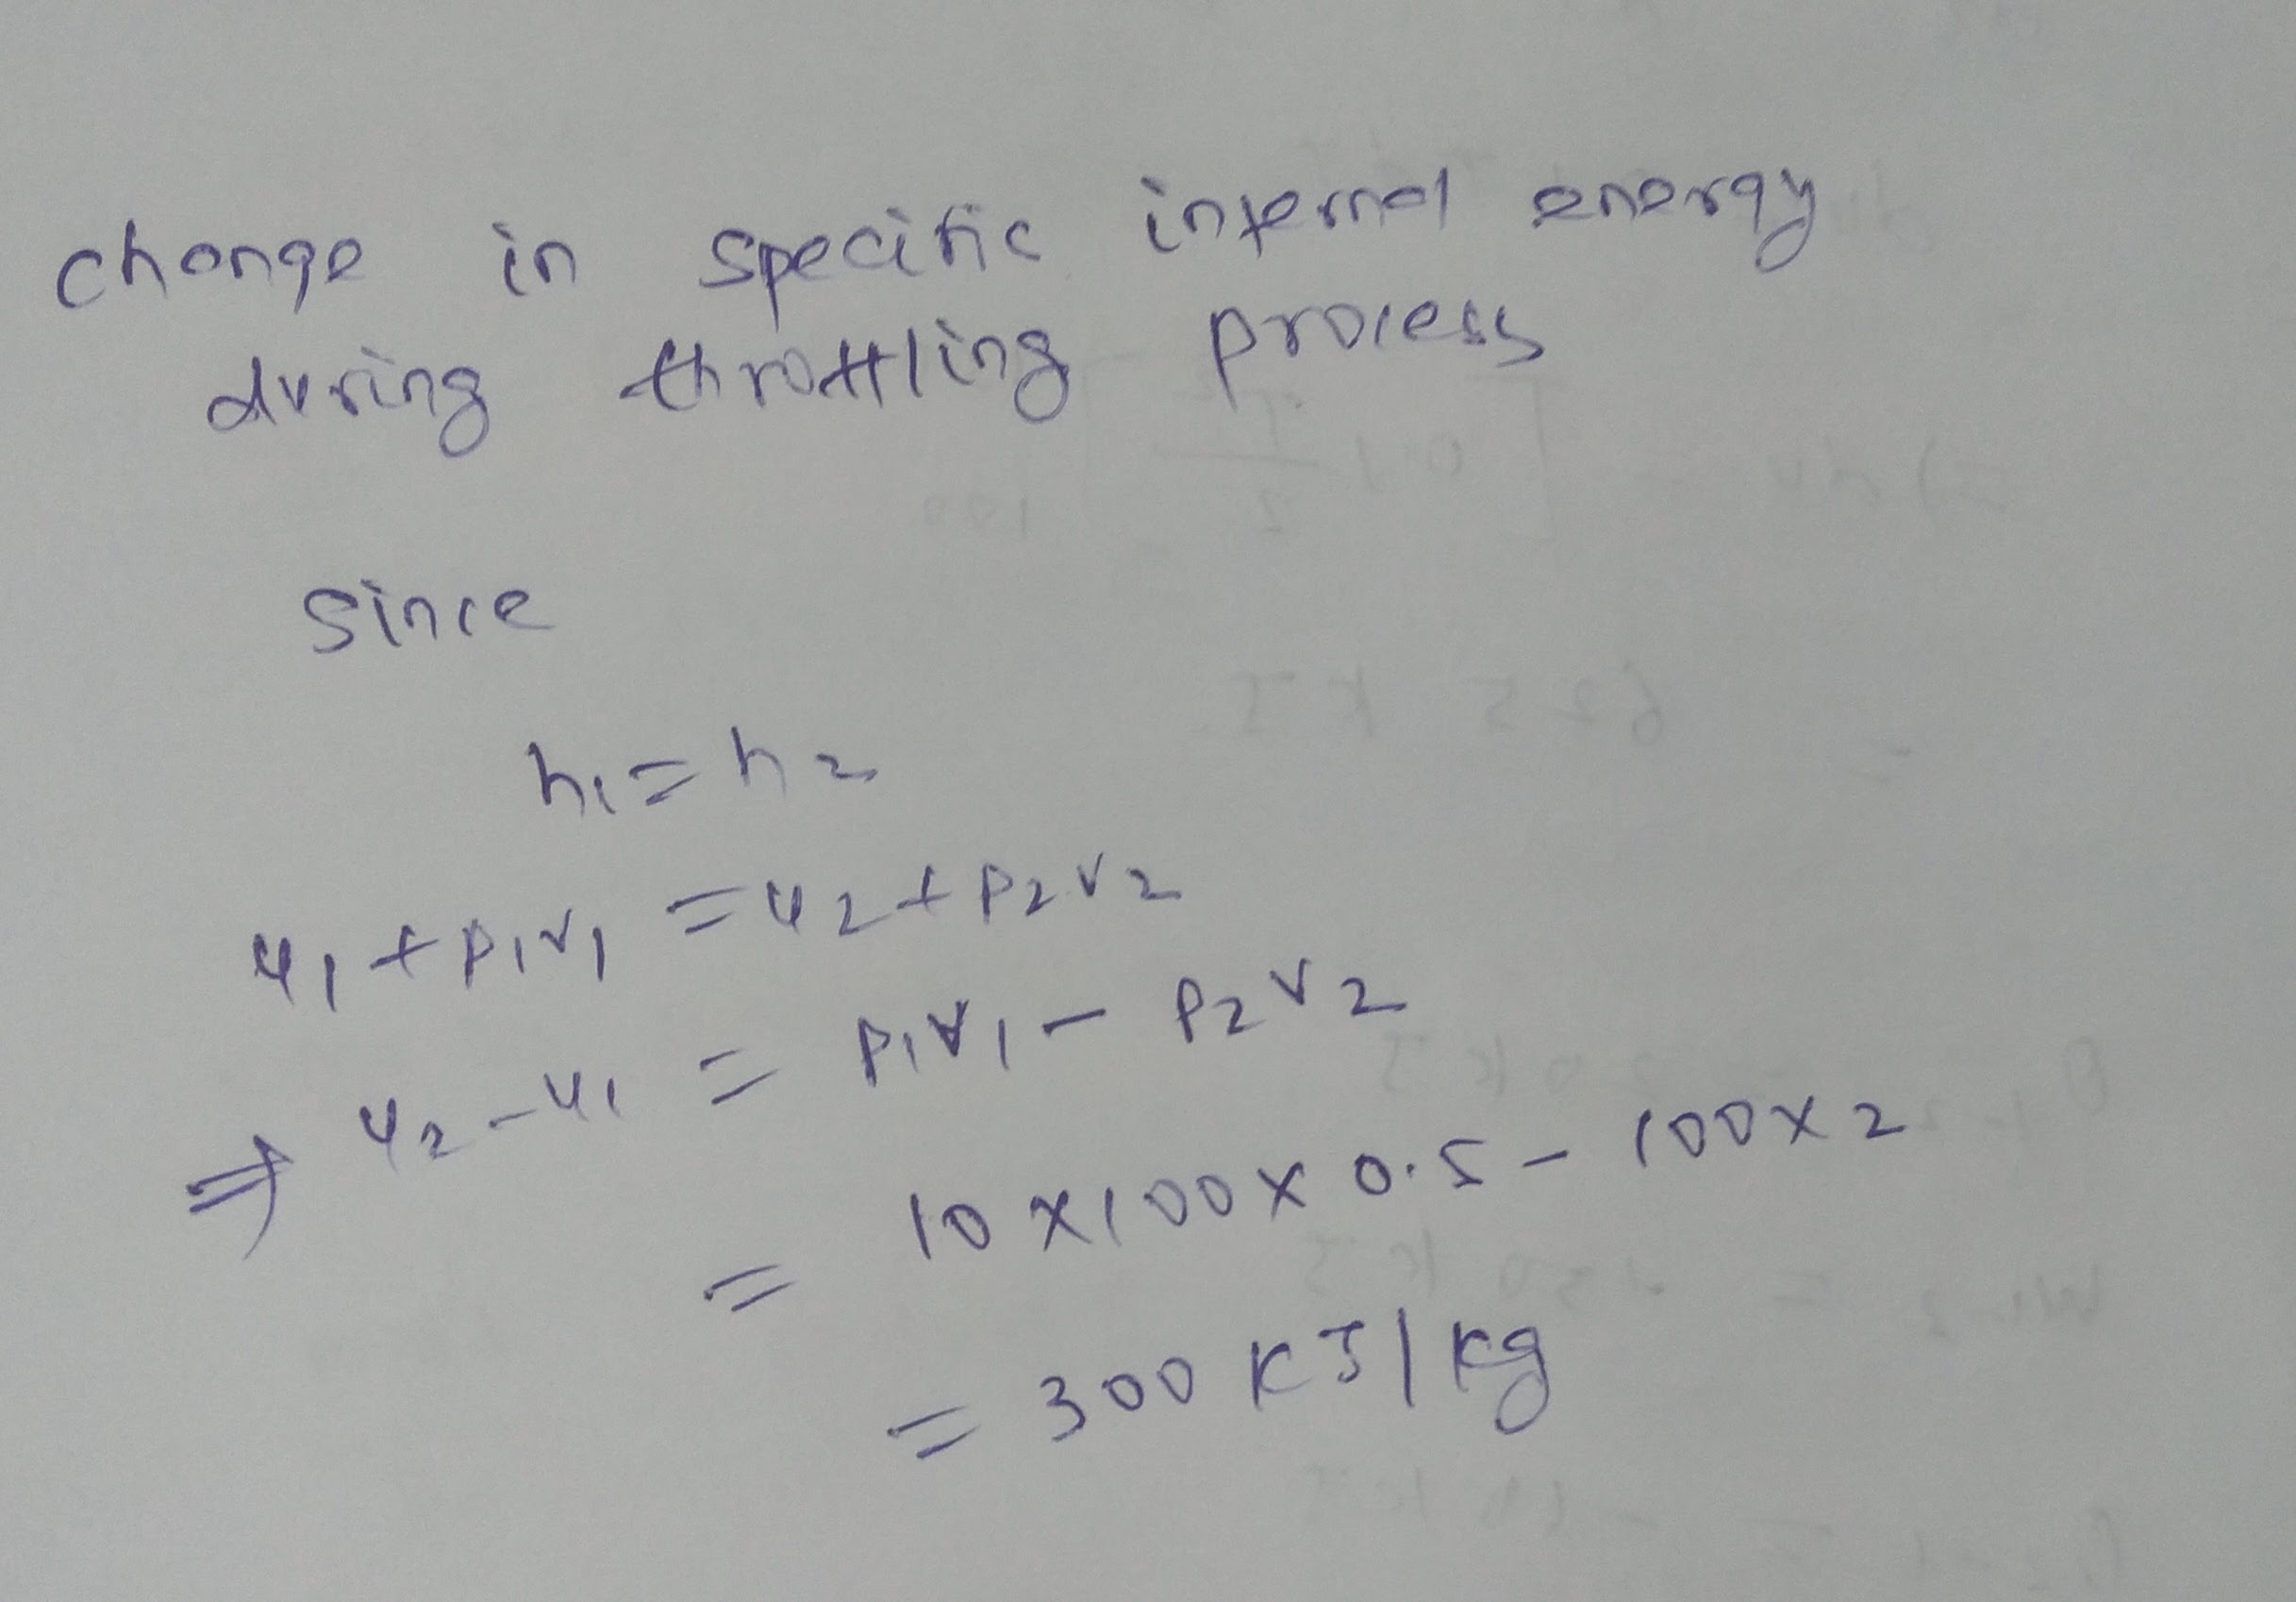 RE: What is the change in specific internal energy during the throttling process?